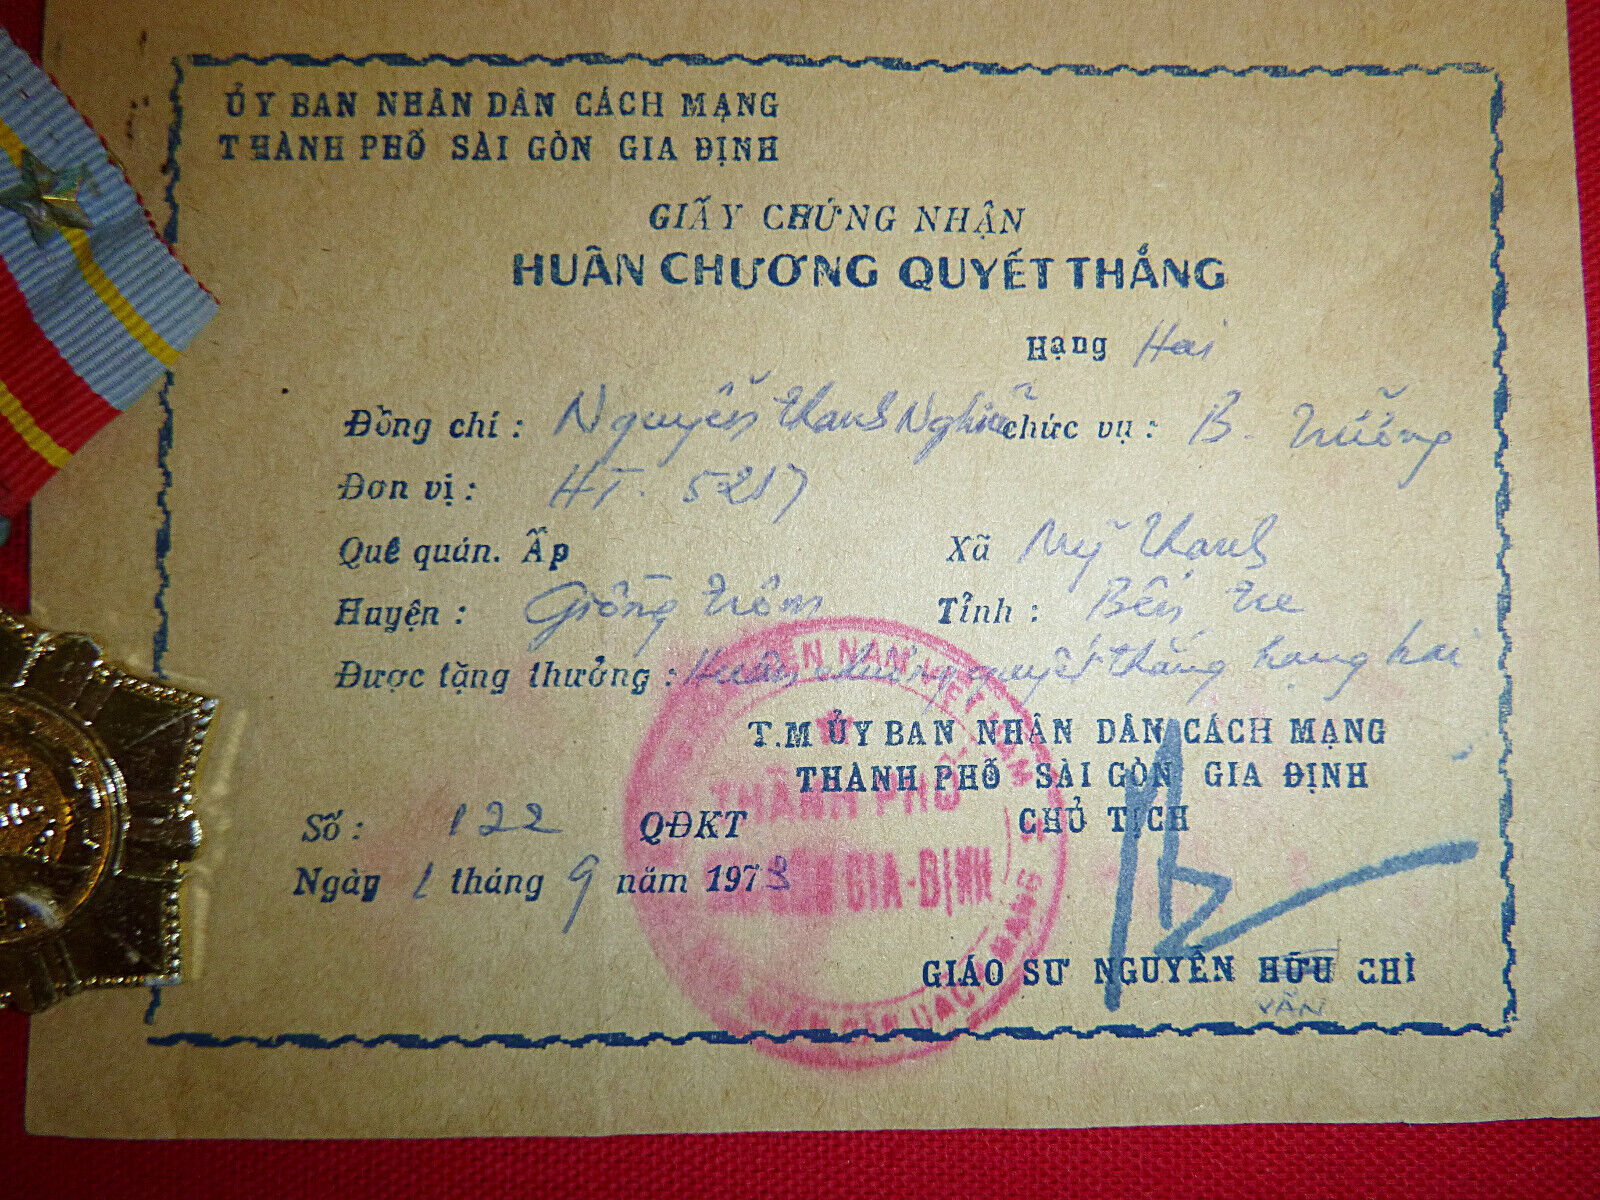 Rare - 1973 NLF Citation Signed by Nguyen Van Chi with Medal - Vietnam War, C149